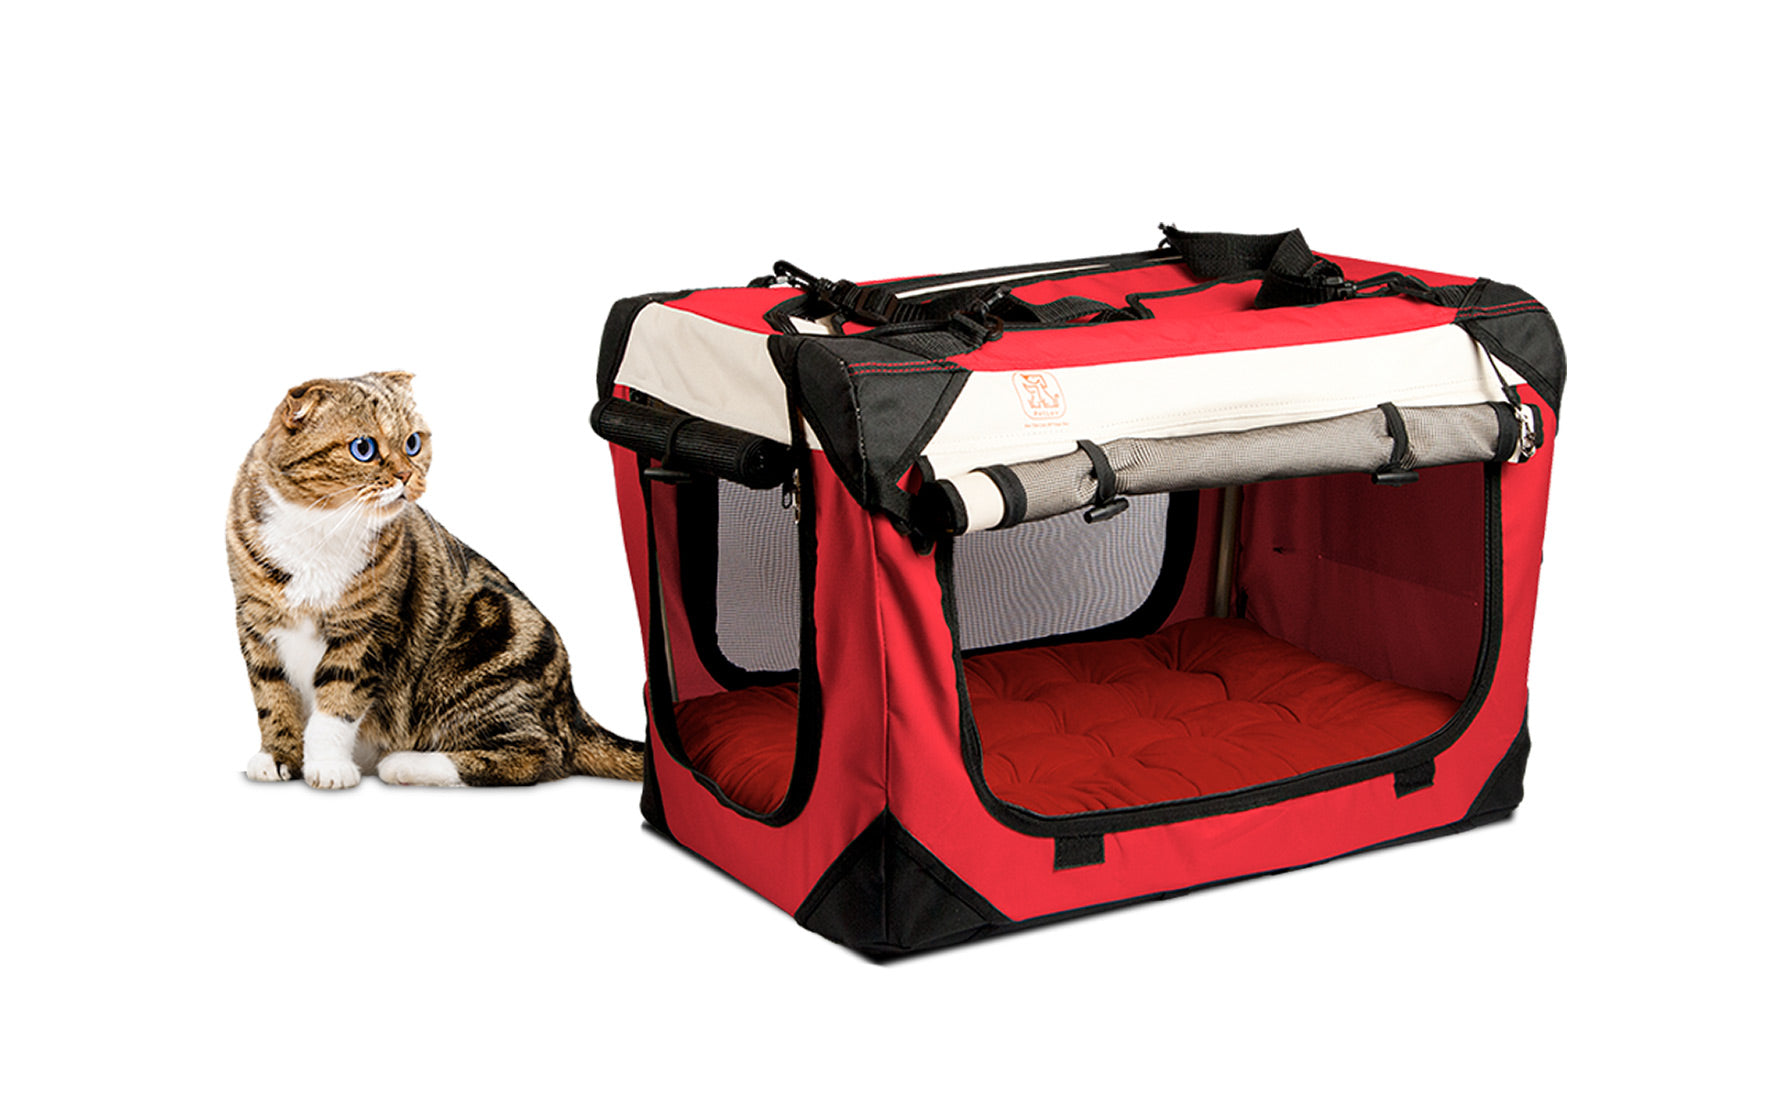 How to Get Your Pet to Love Their New Pet Carrier